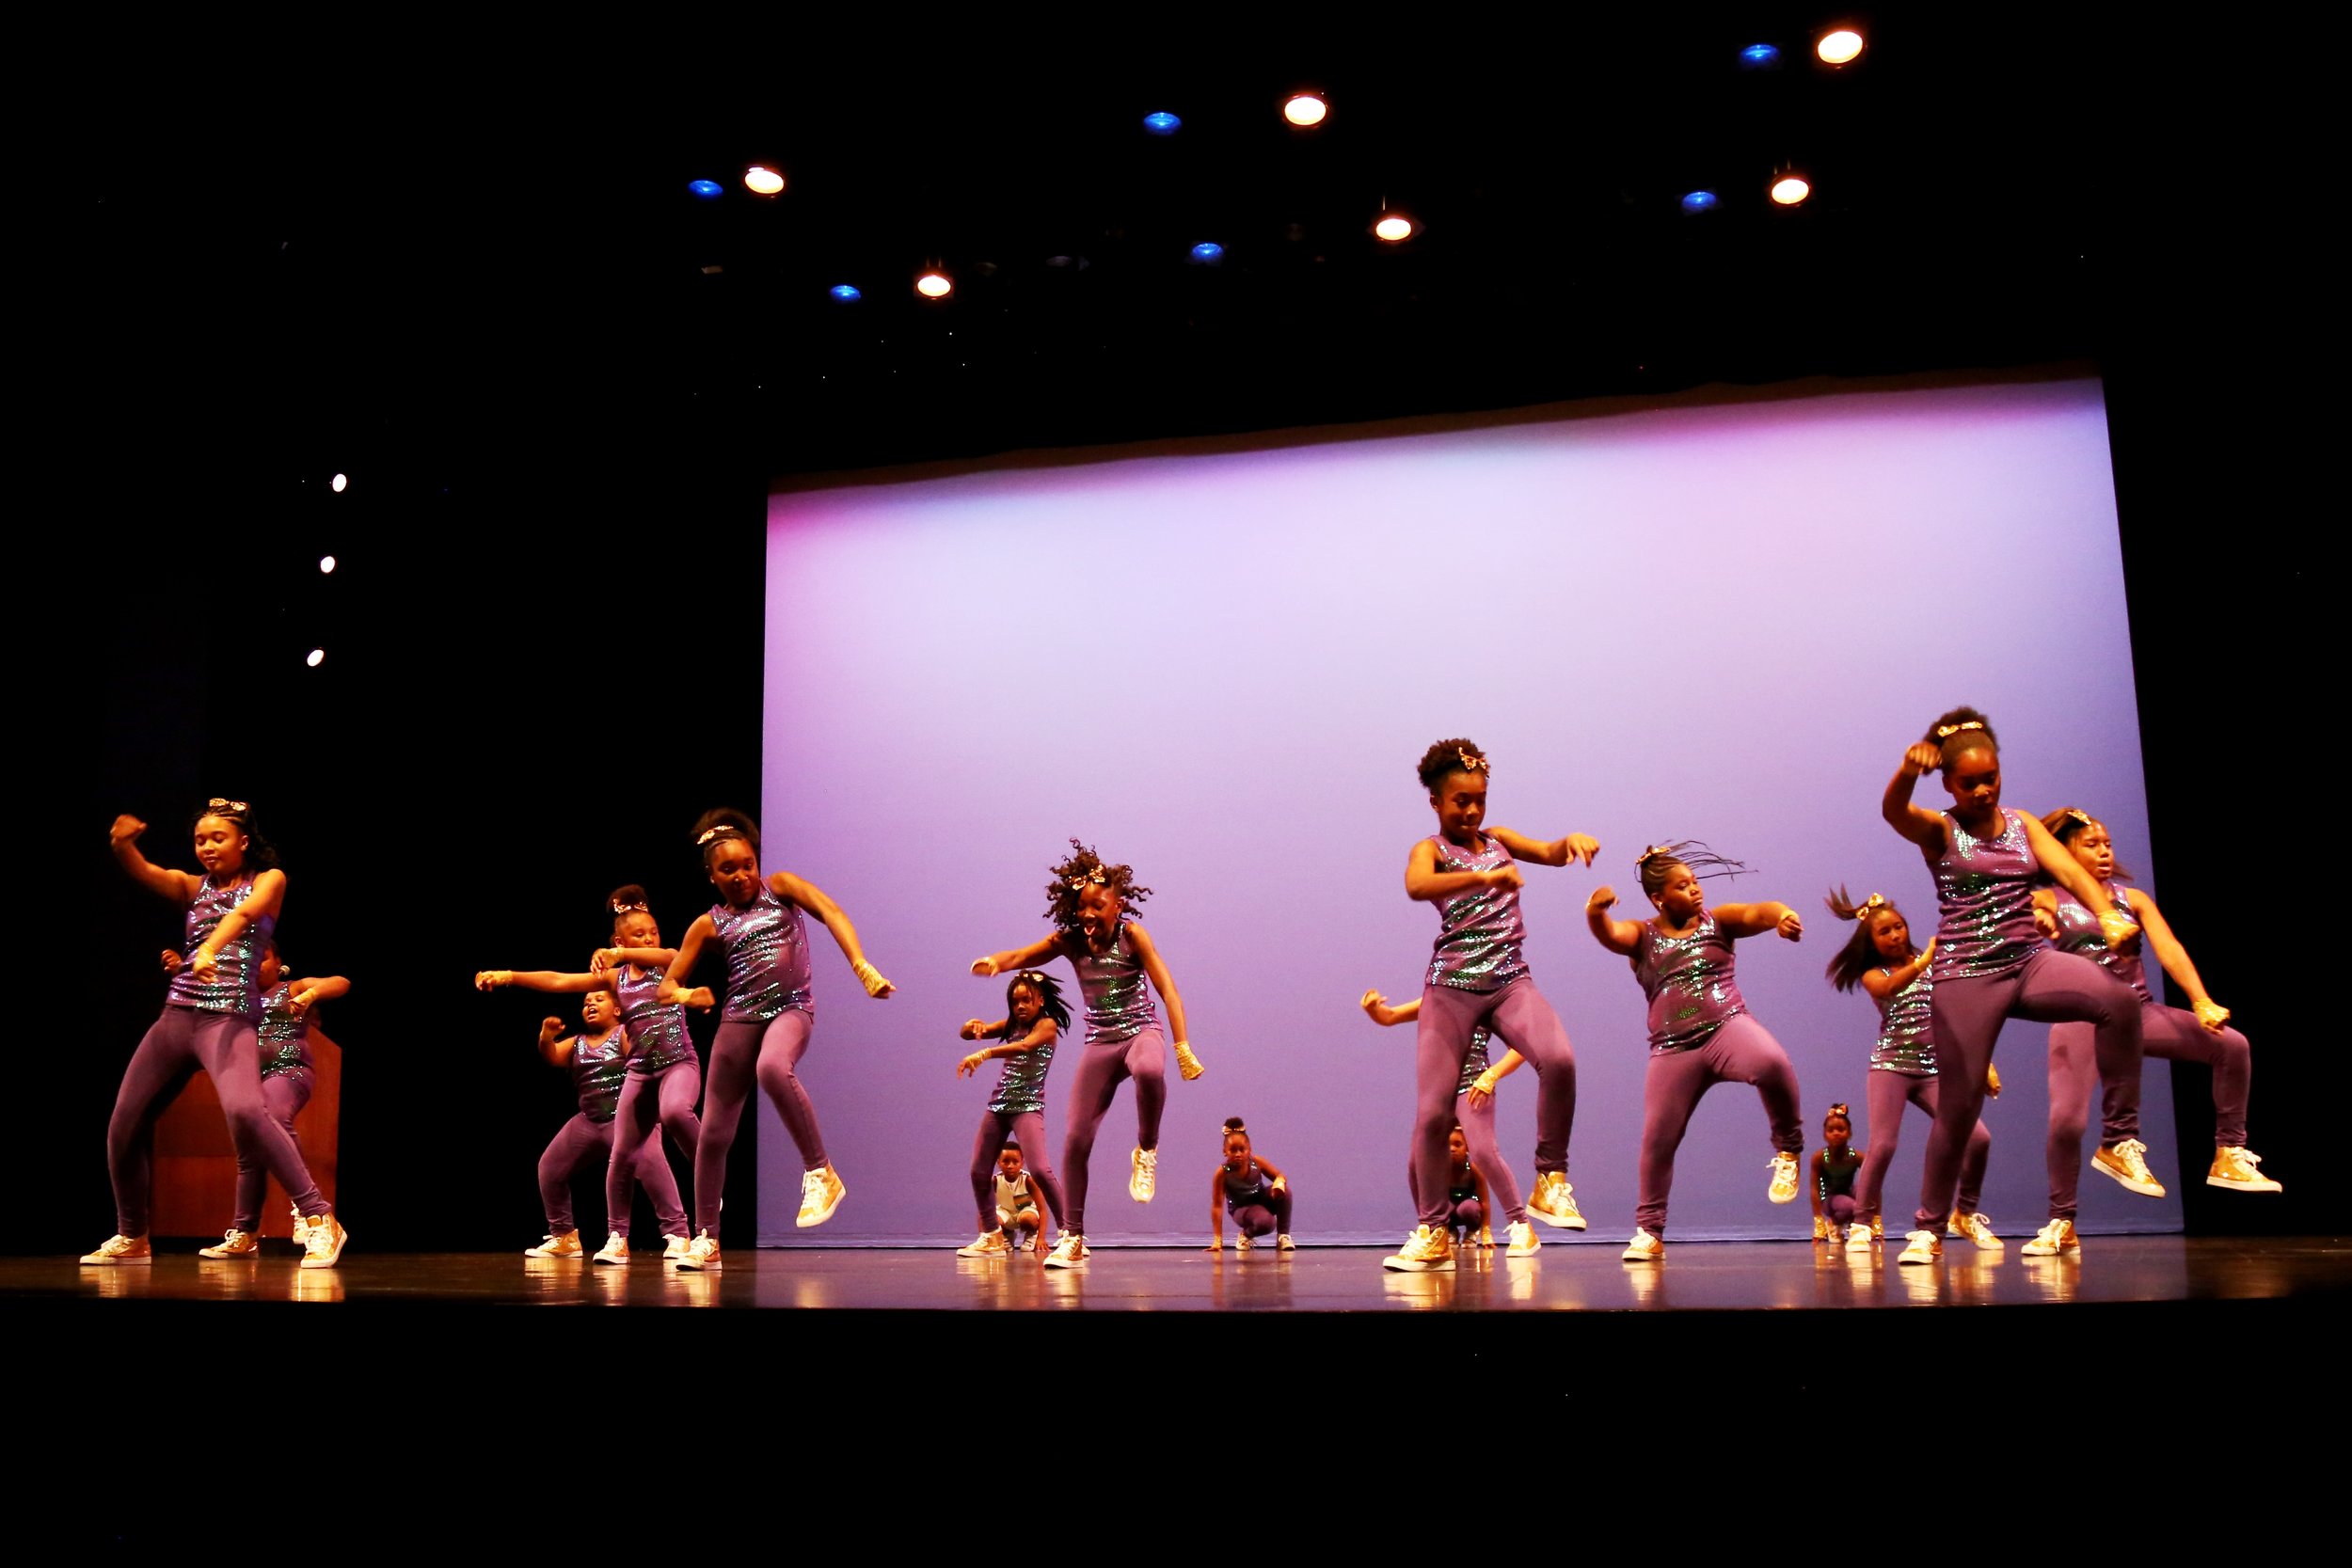     Young people from the Chestnut Street YMCA Dance Studio, choreographed by AR instructor Keisha Walker, perform at the ArtsReach Performing Arts Showcase May 21, 2017.  For more photos from that night: https://www.flickr.com/photos/kentuckycenter/